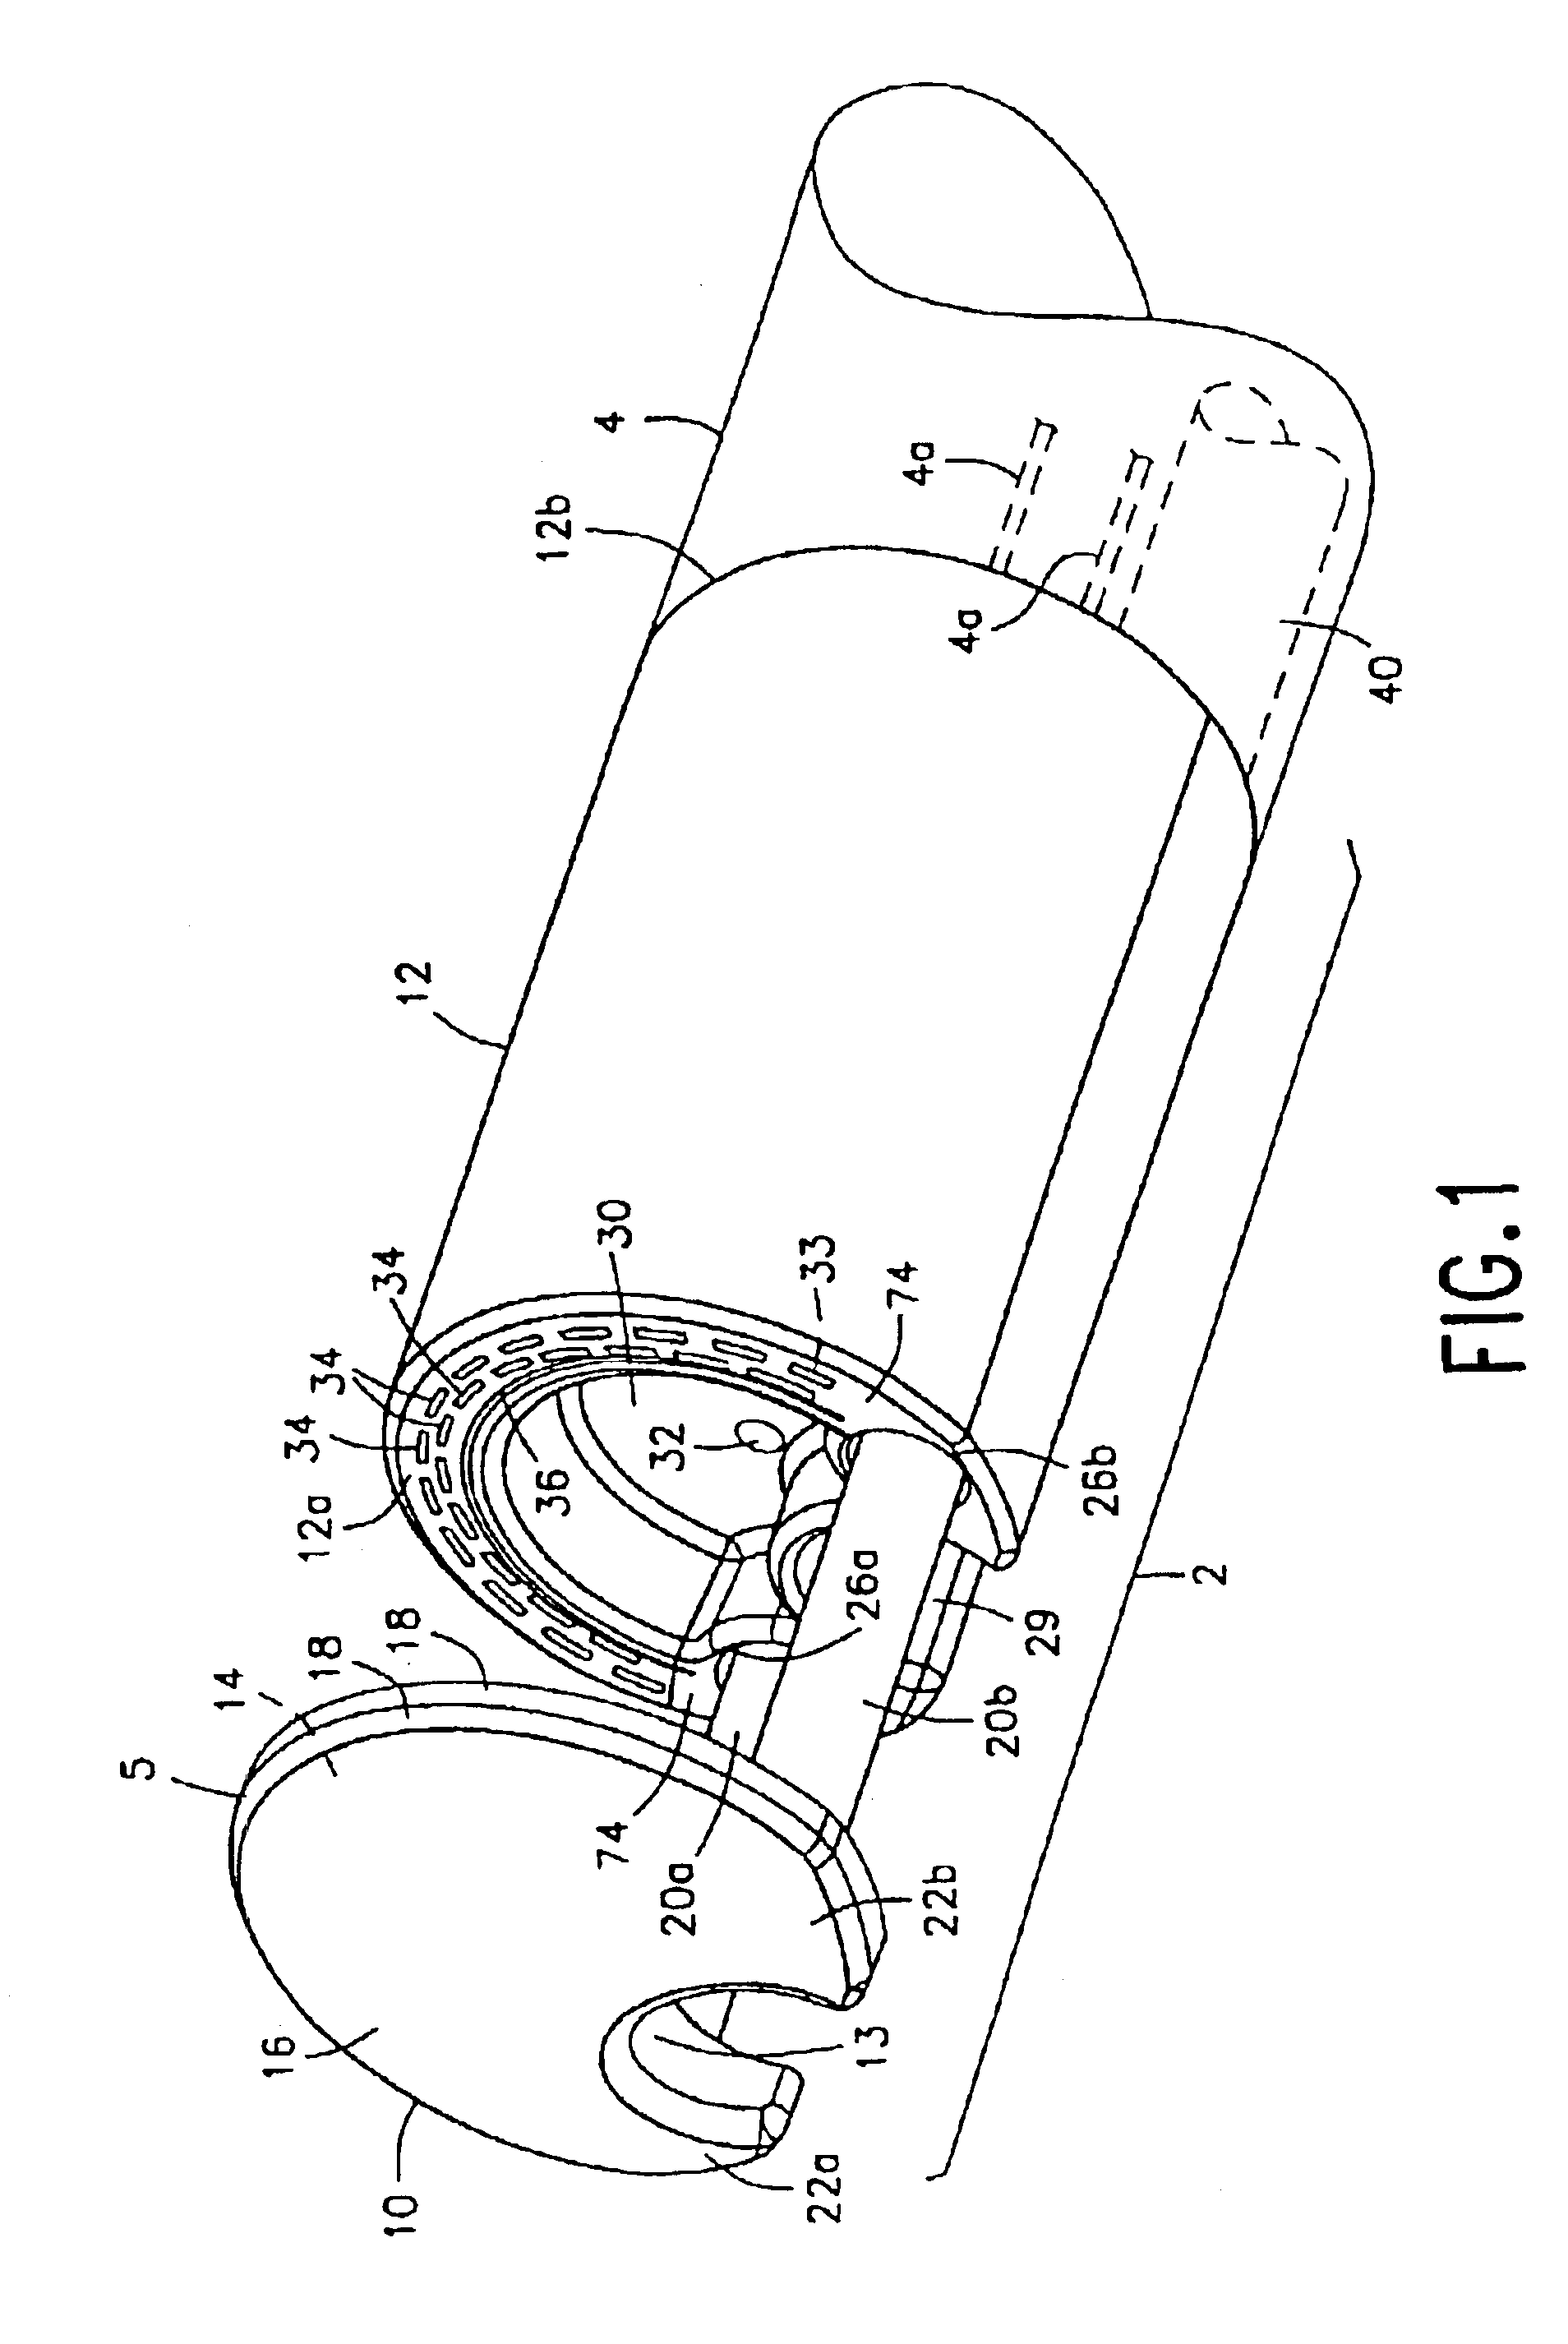 Integrated surgical staple retainer for a full thickness resectioning device